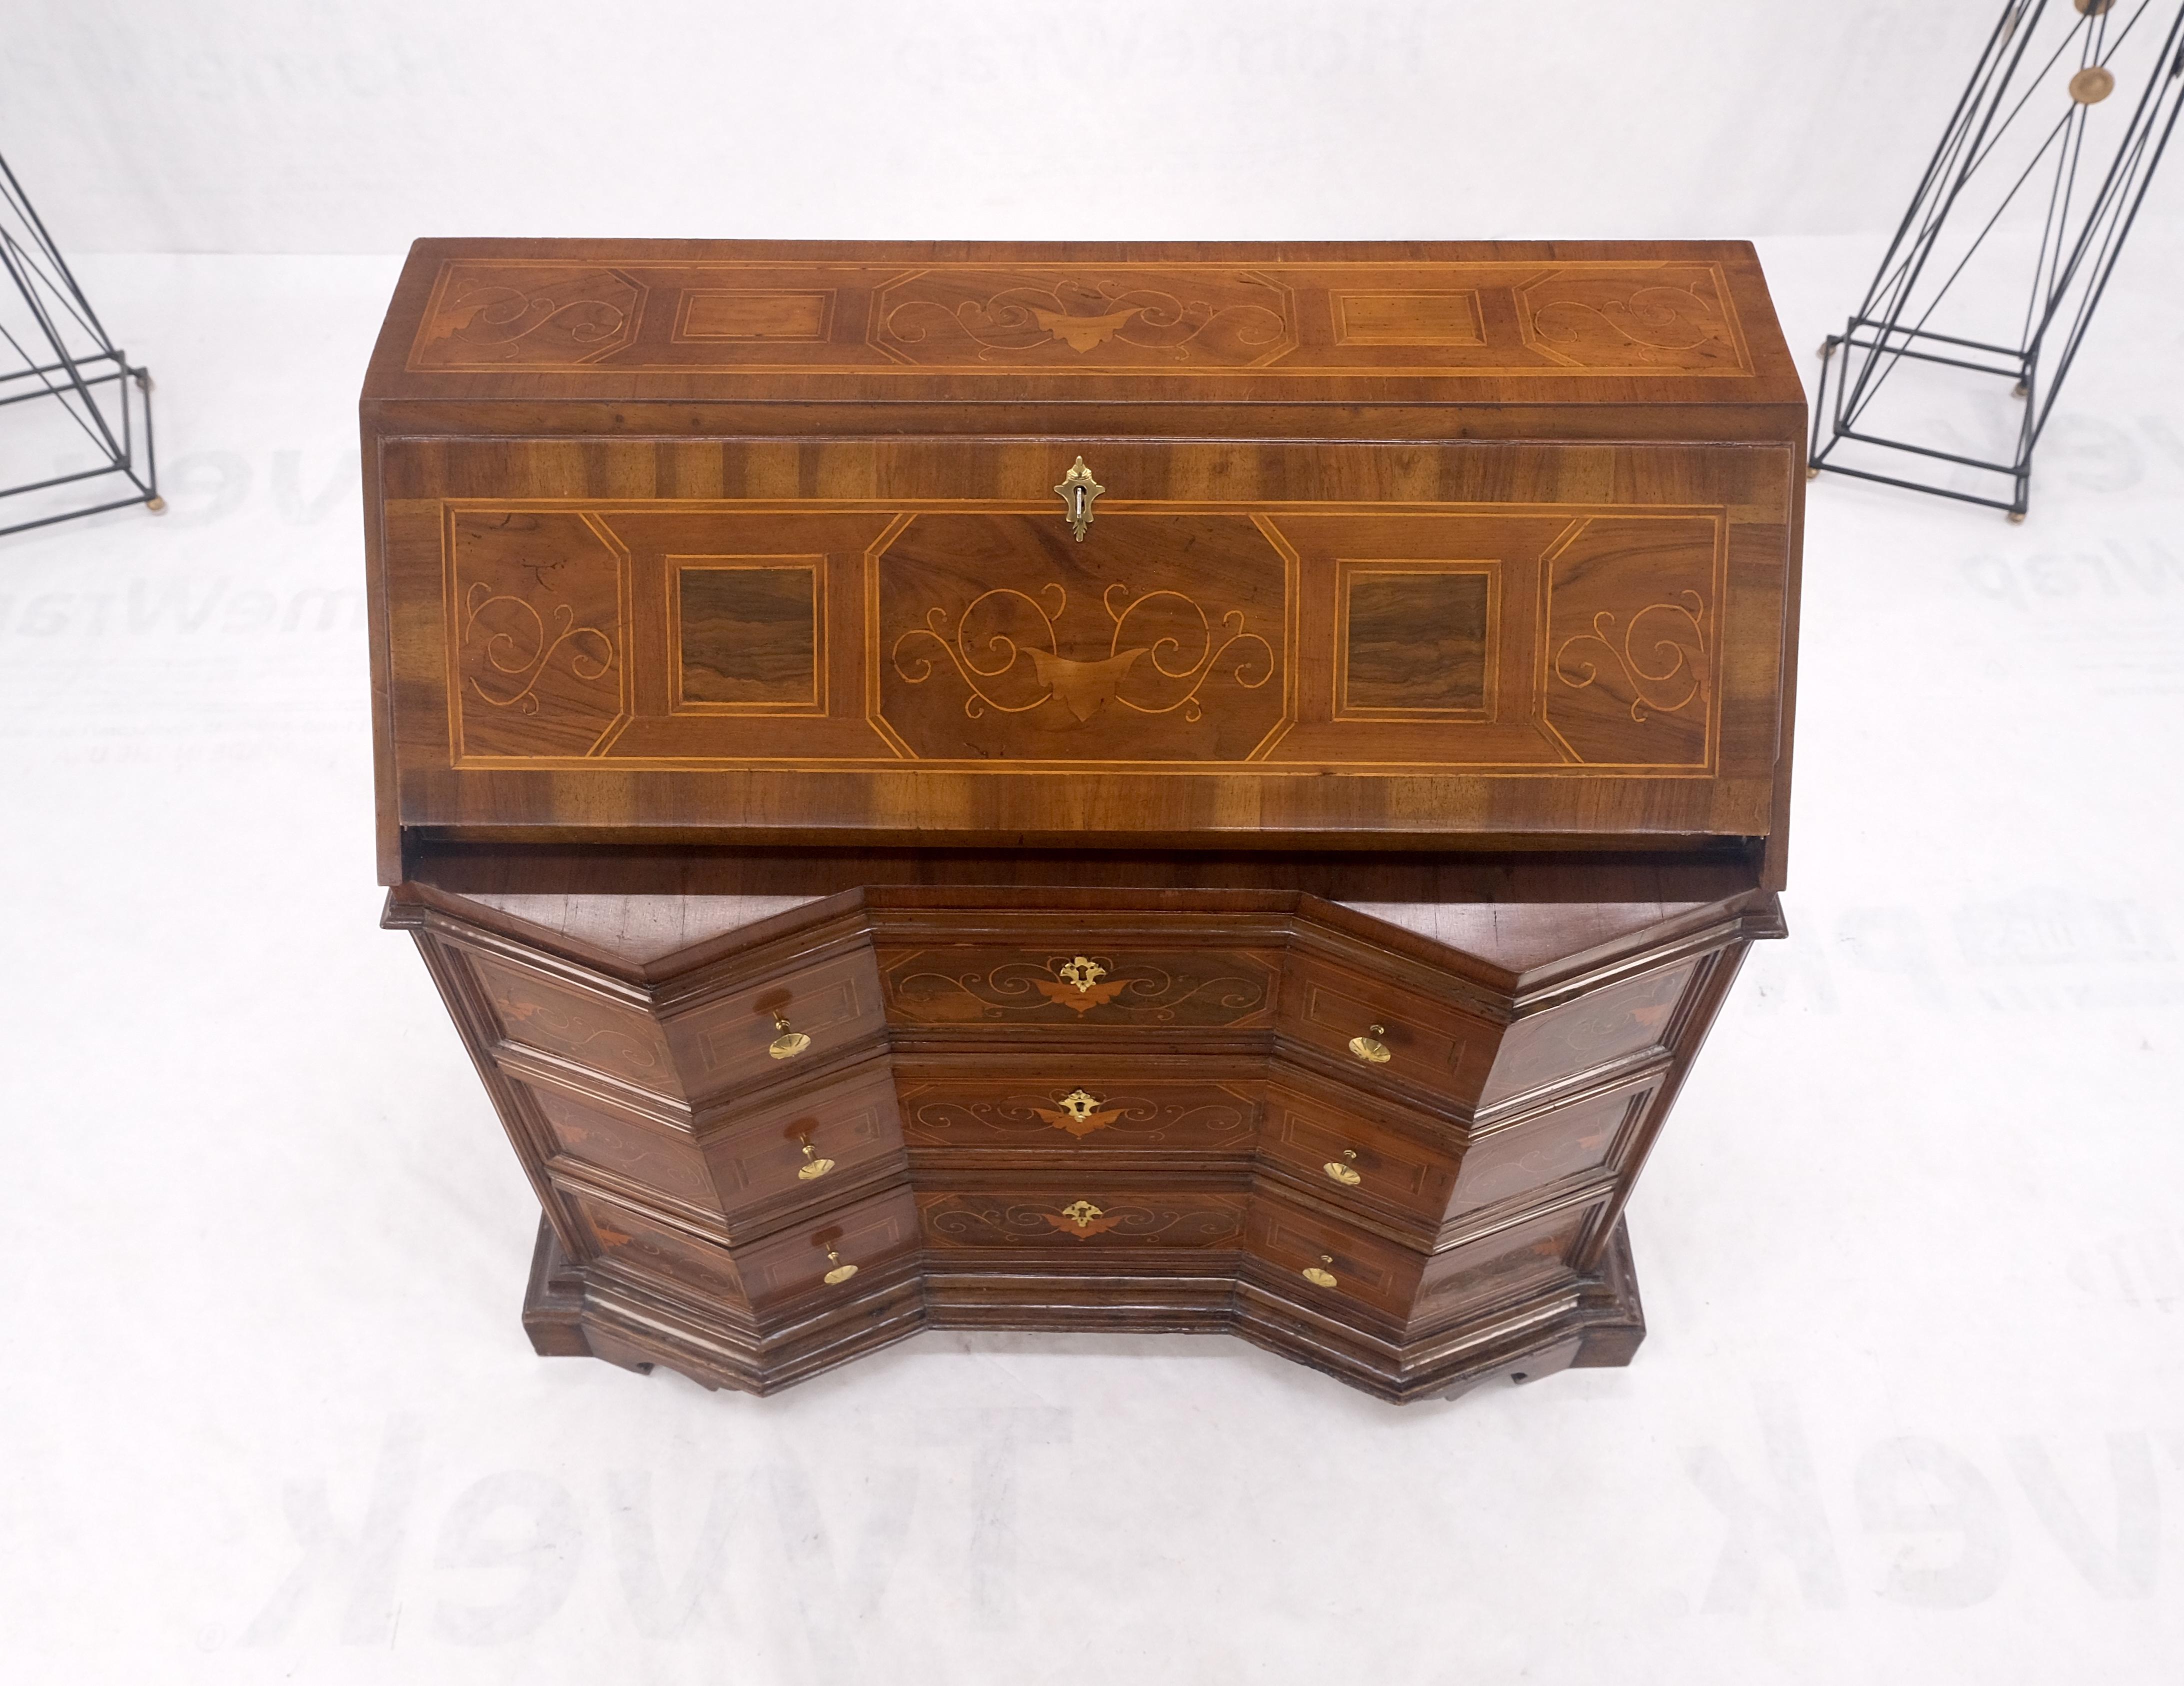 Antique Biedermeier Style Inlay Drop Front Secretary Desk 3 Drawers Dresser NICE.
Beautiful inlay and consistent patina.